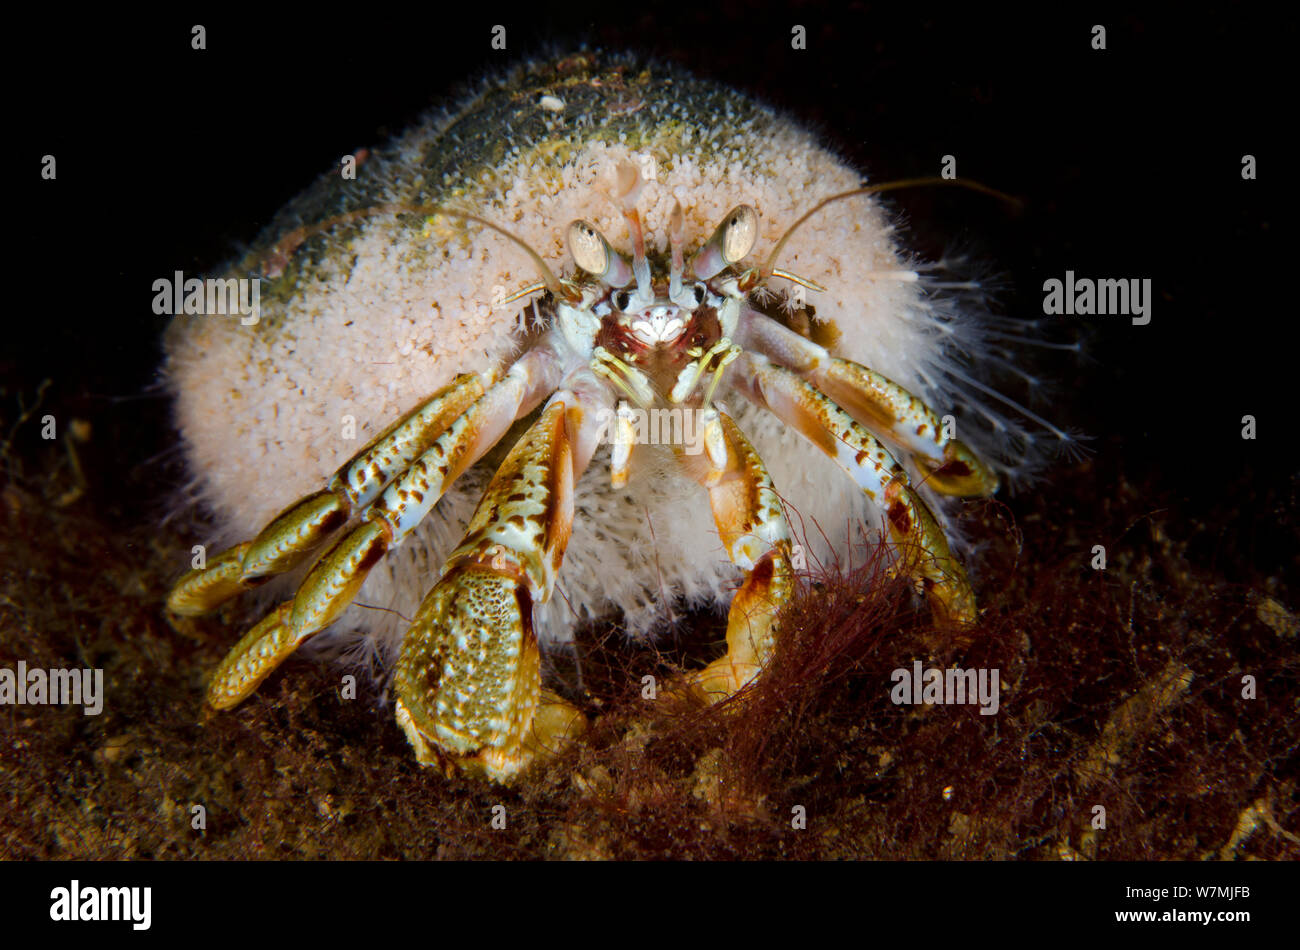 Common hermit crab (Pagurus bernhardus) in a mollusc shell covered in the hydroid (Hydractinia echinata) which lives only on the shells of hermit crabs. Loch Fyne, Argyll and Bute, Scotland, UK, May Stock Photo